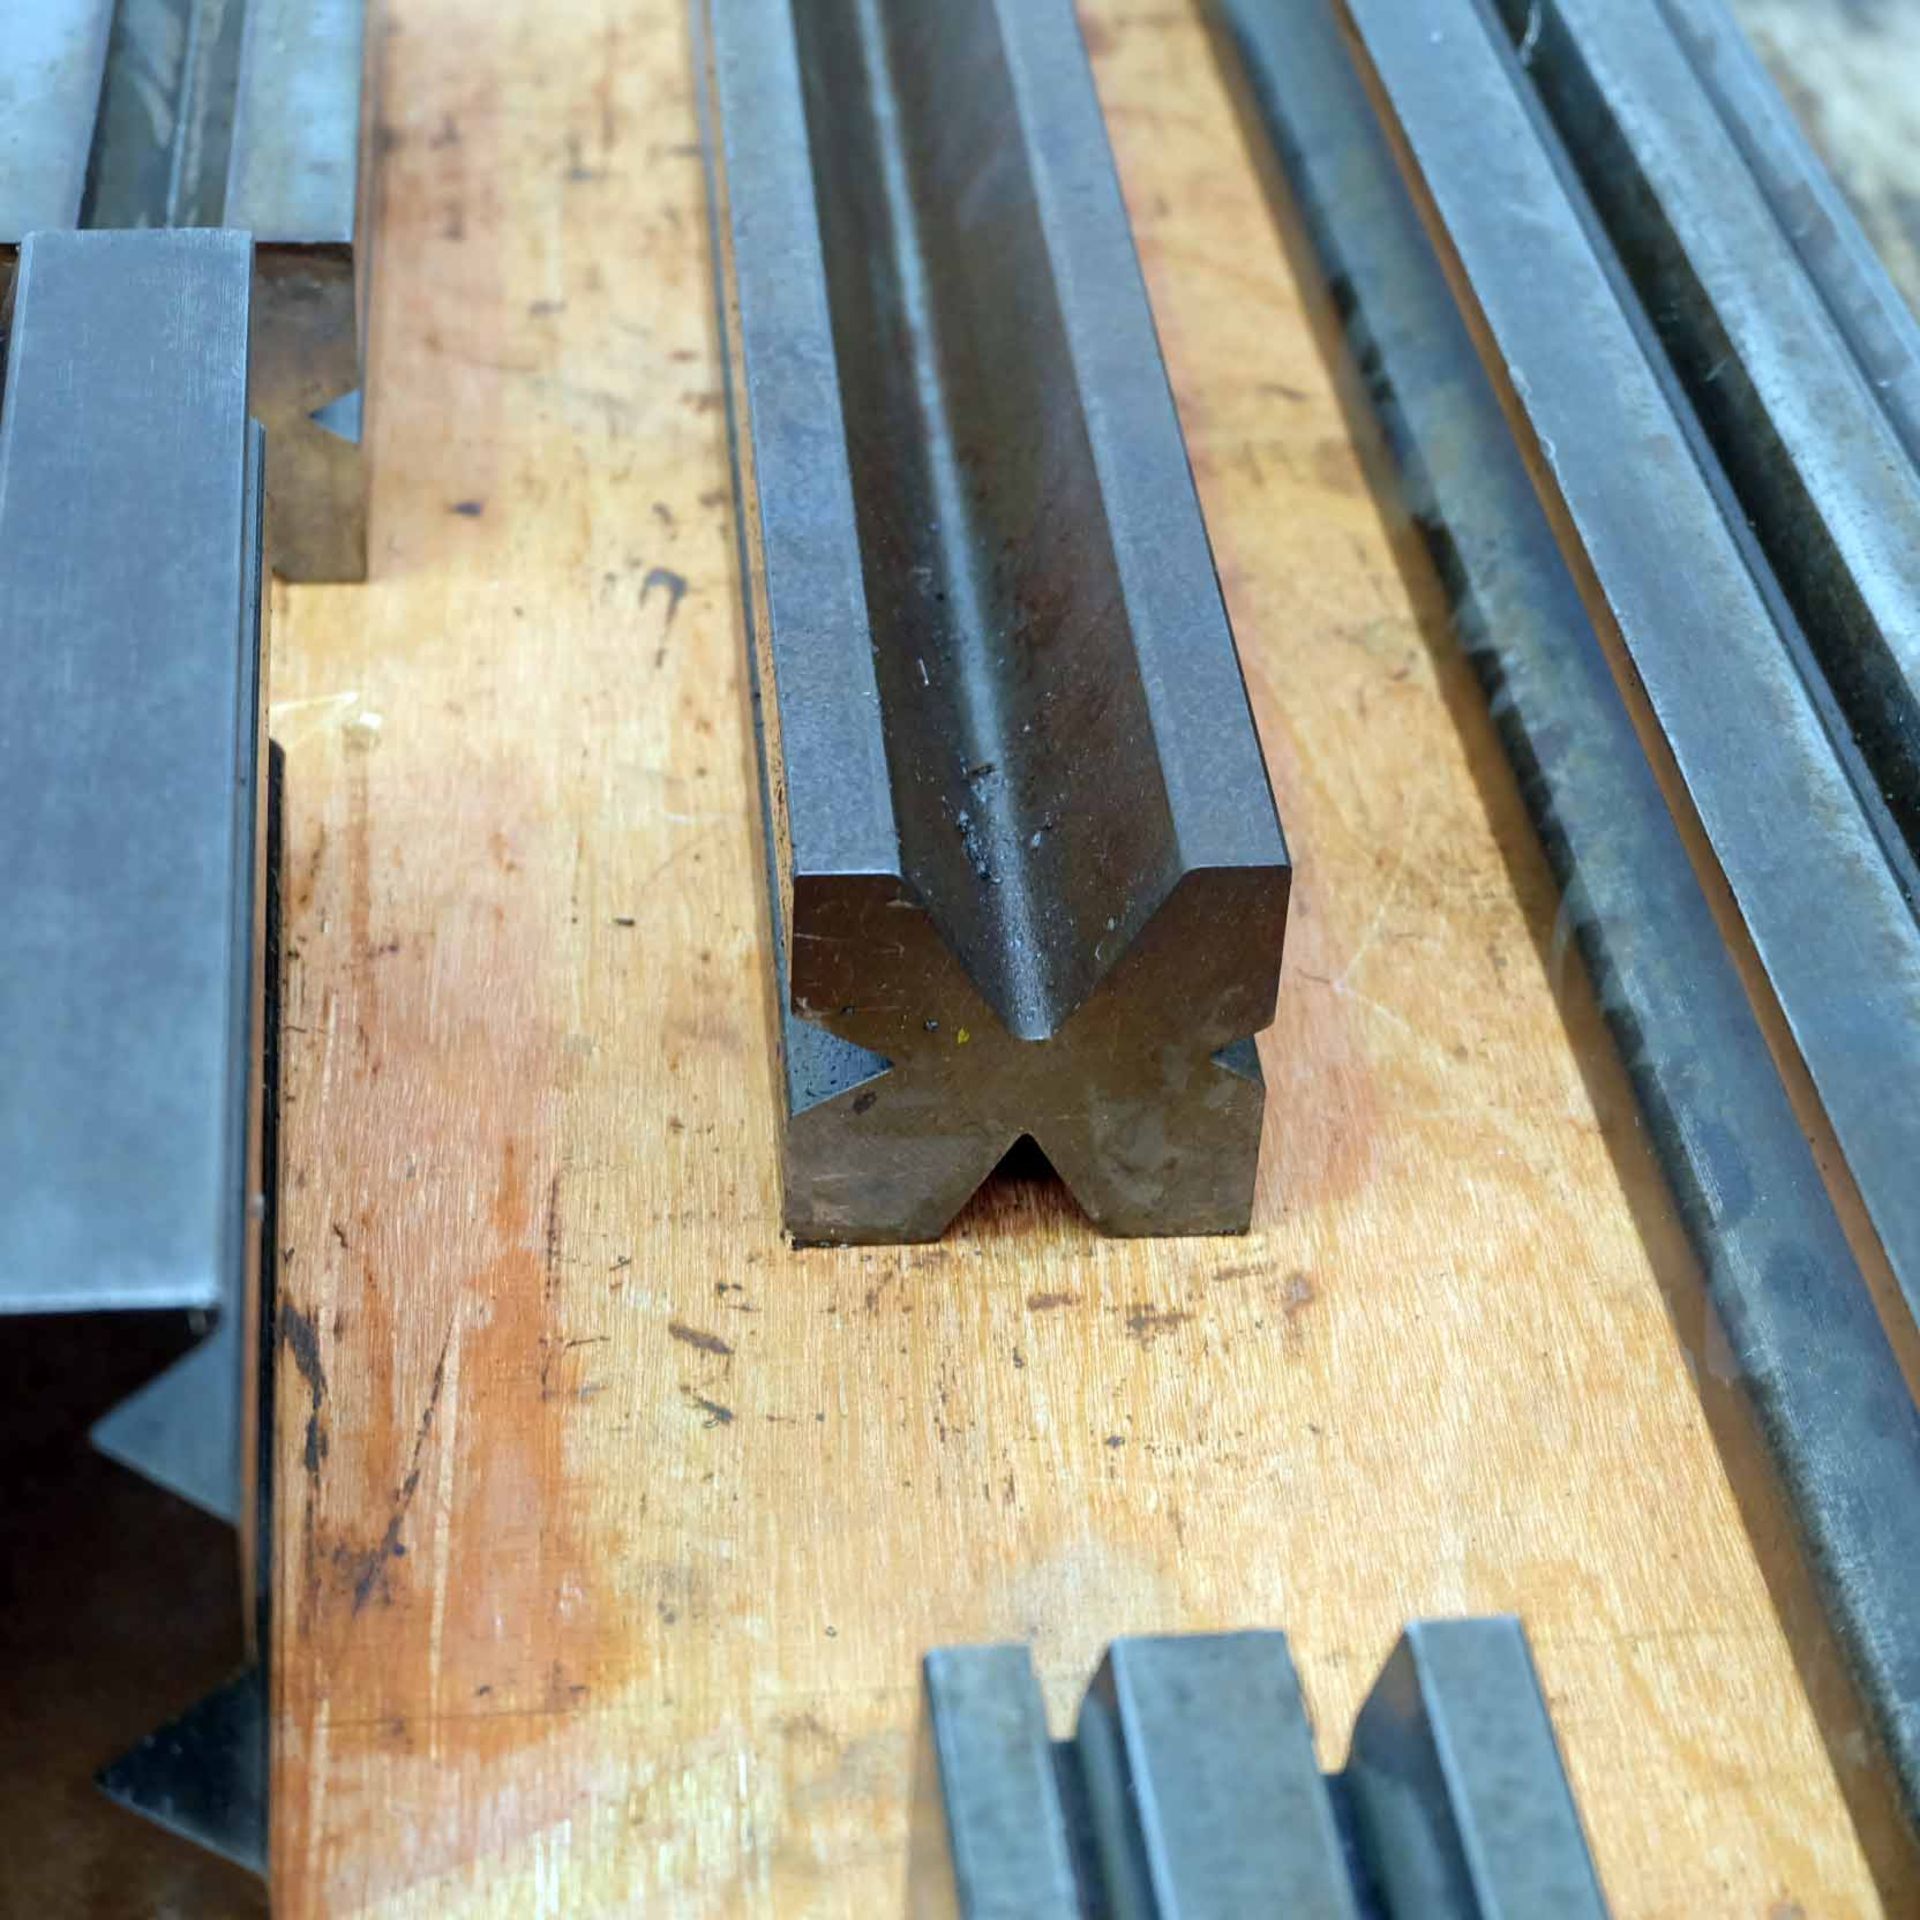 Quantity of Miscalaneous Press Brake Bottom Tooling. Various Sizes & Shapes. - Image 6 of 7